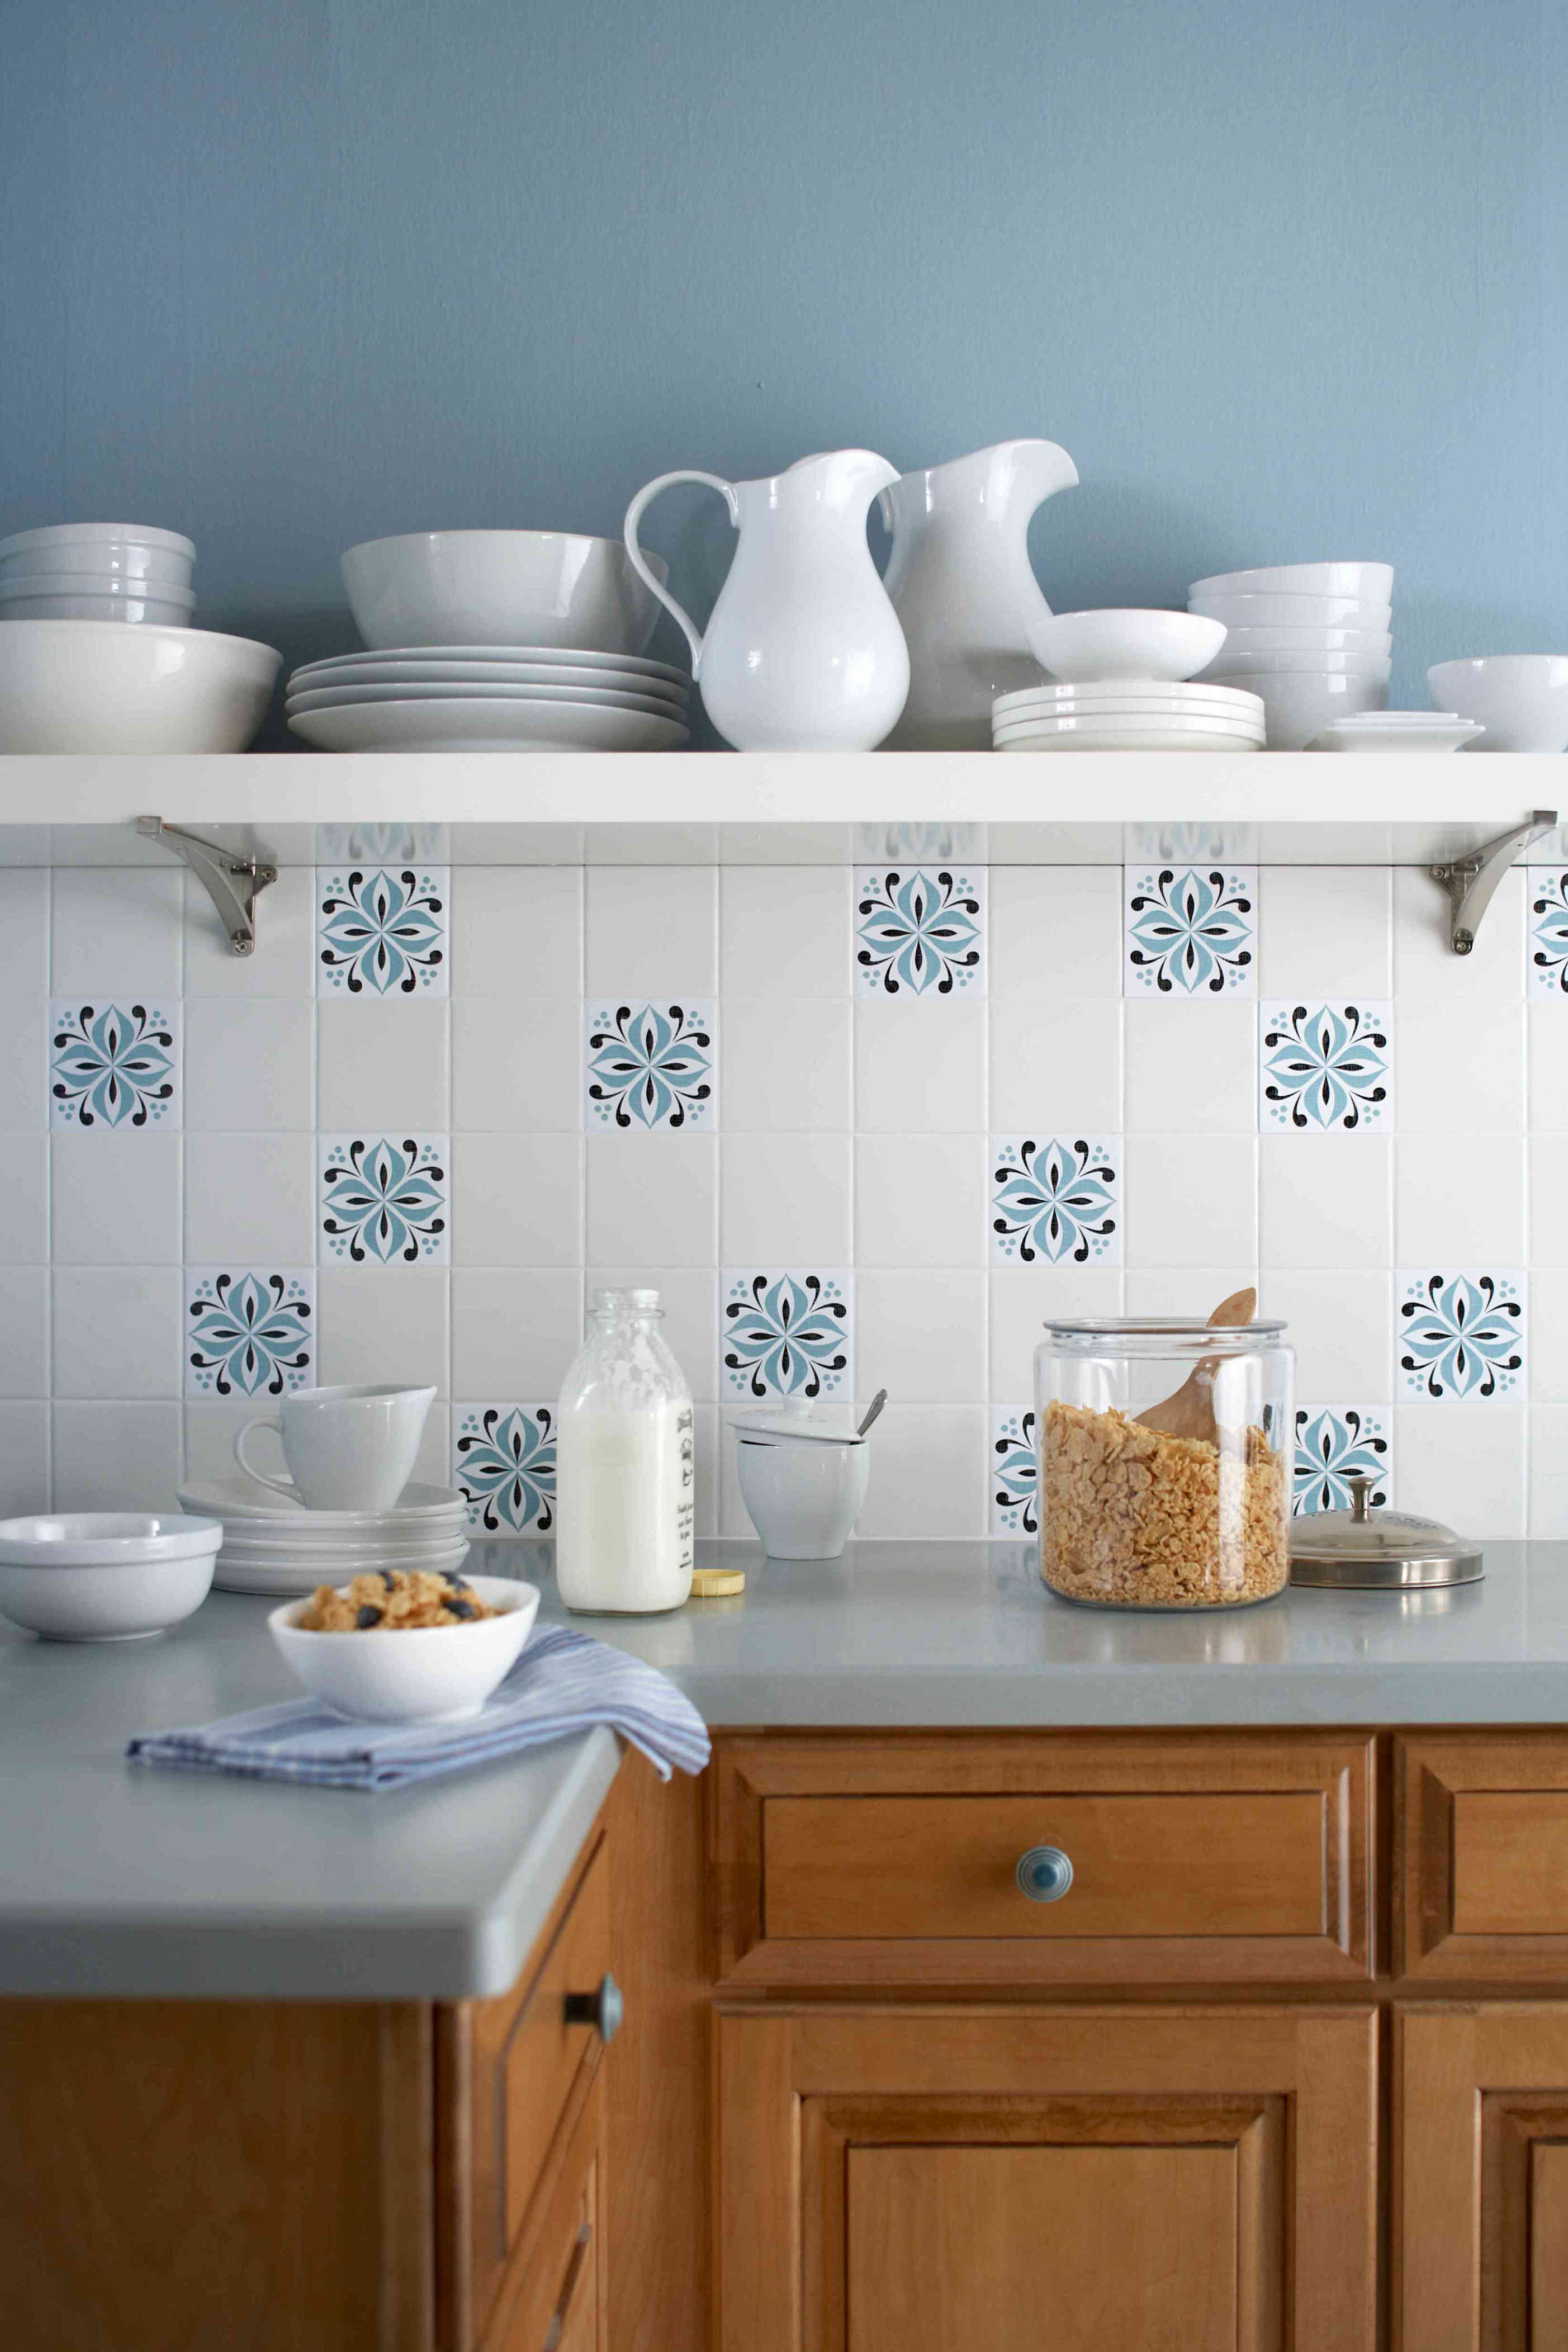 Peel-and-Stick Backsplash Tiles Are the Renter-Friendly Kitchen Solution